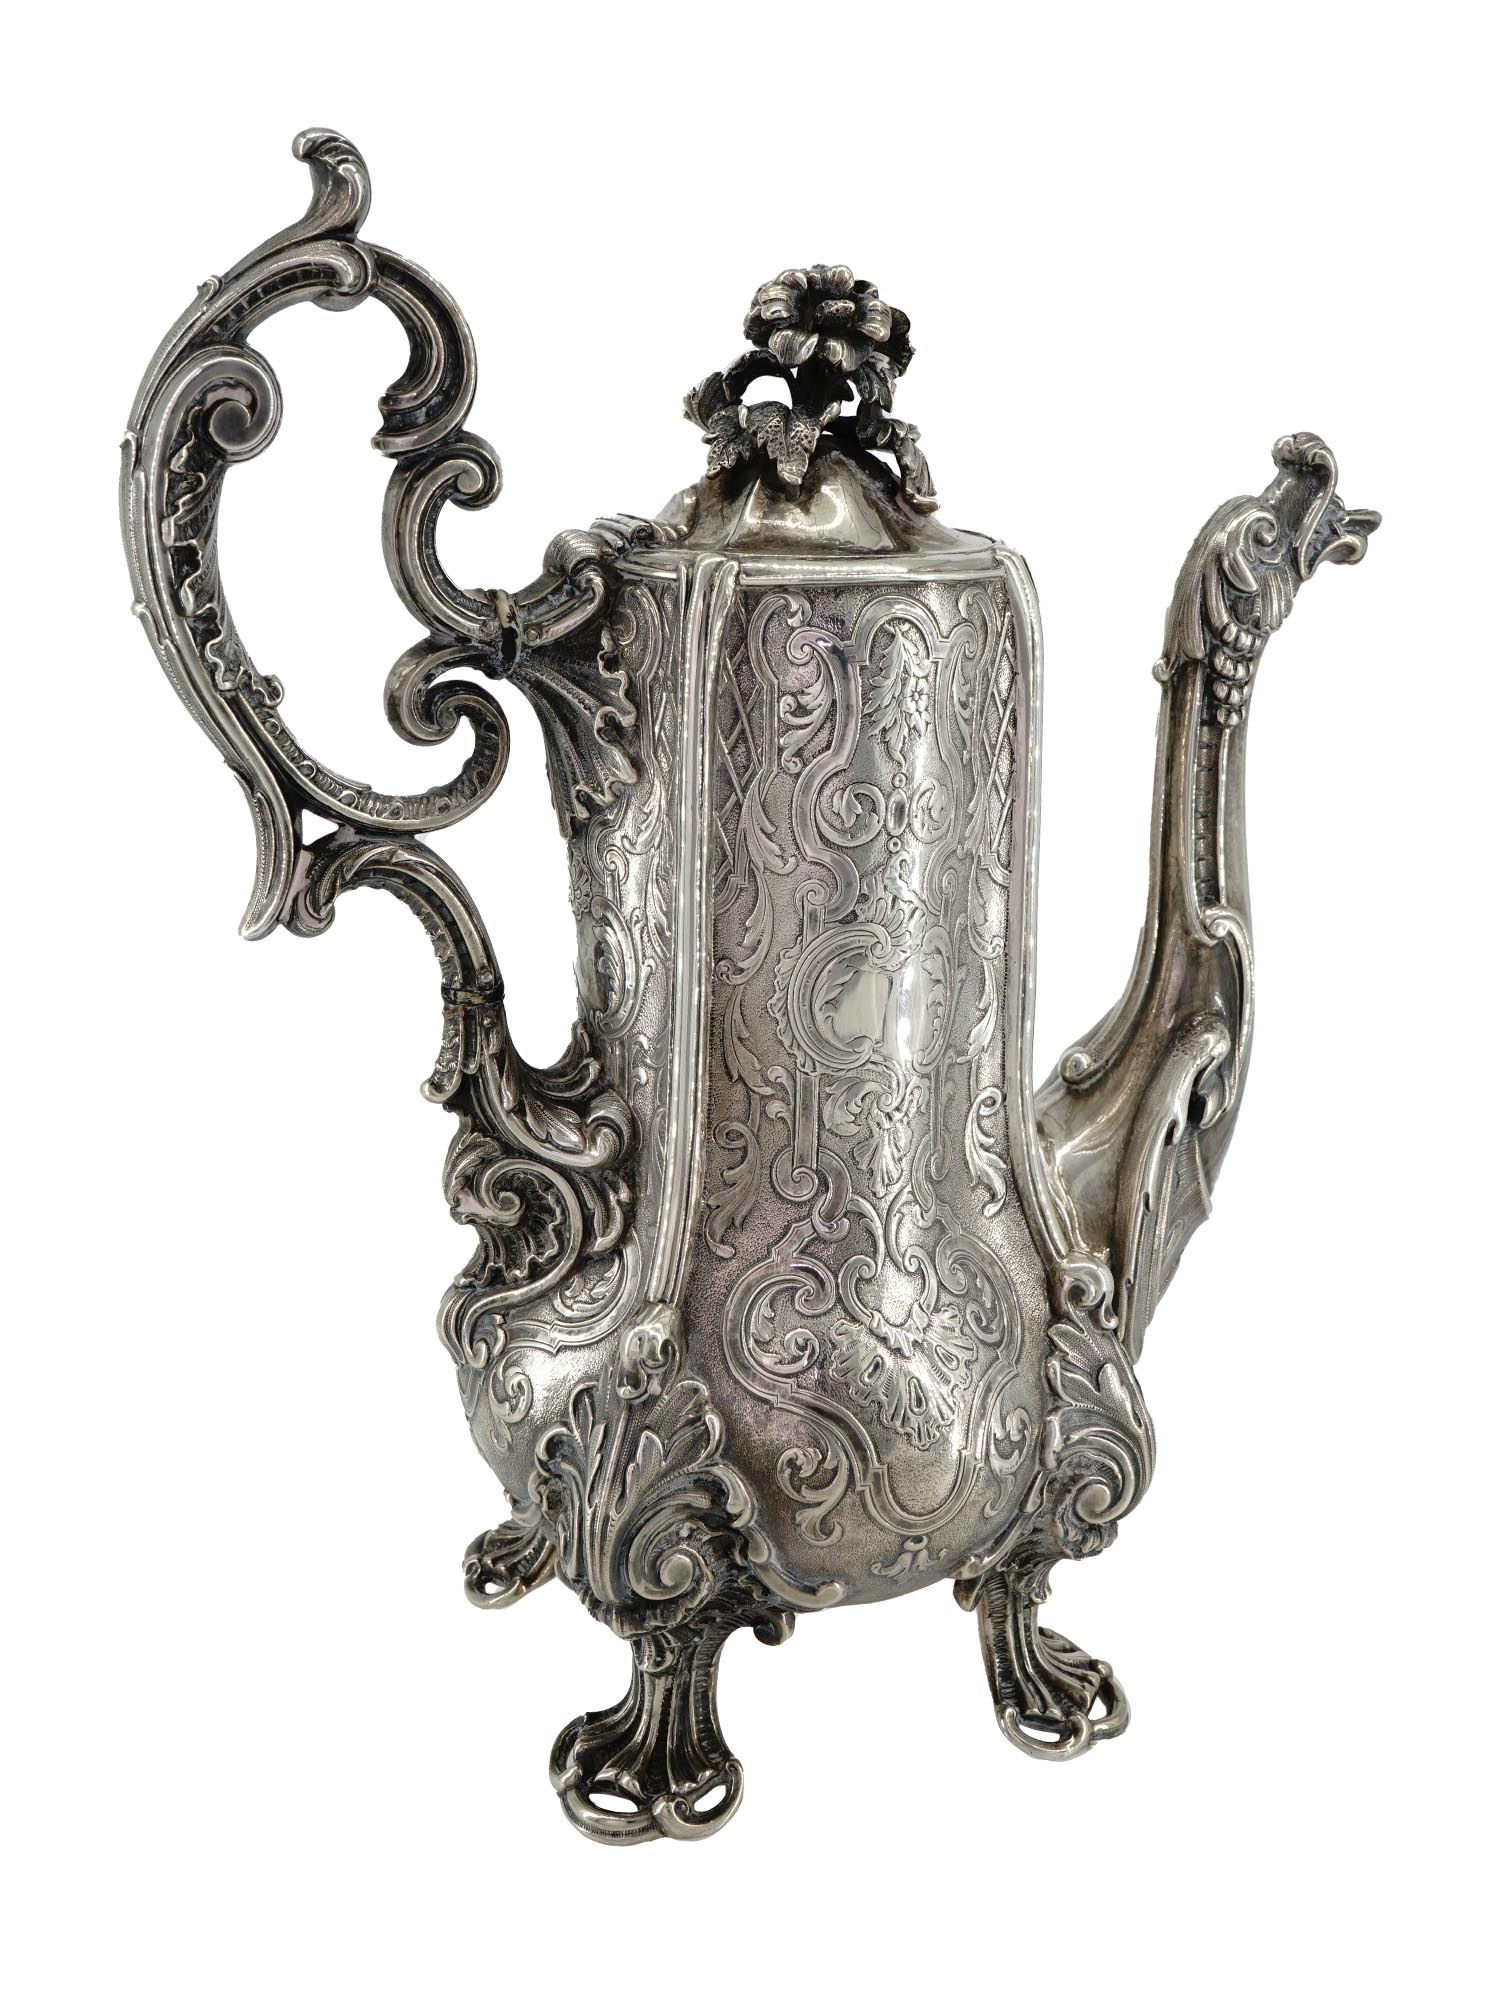 ANTIQUE FRENCH SILVER DRAGON COFFEE POT BY ODIOT PIC-1